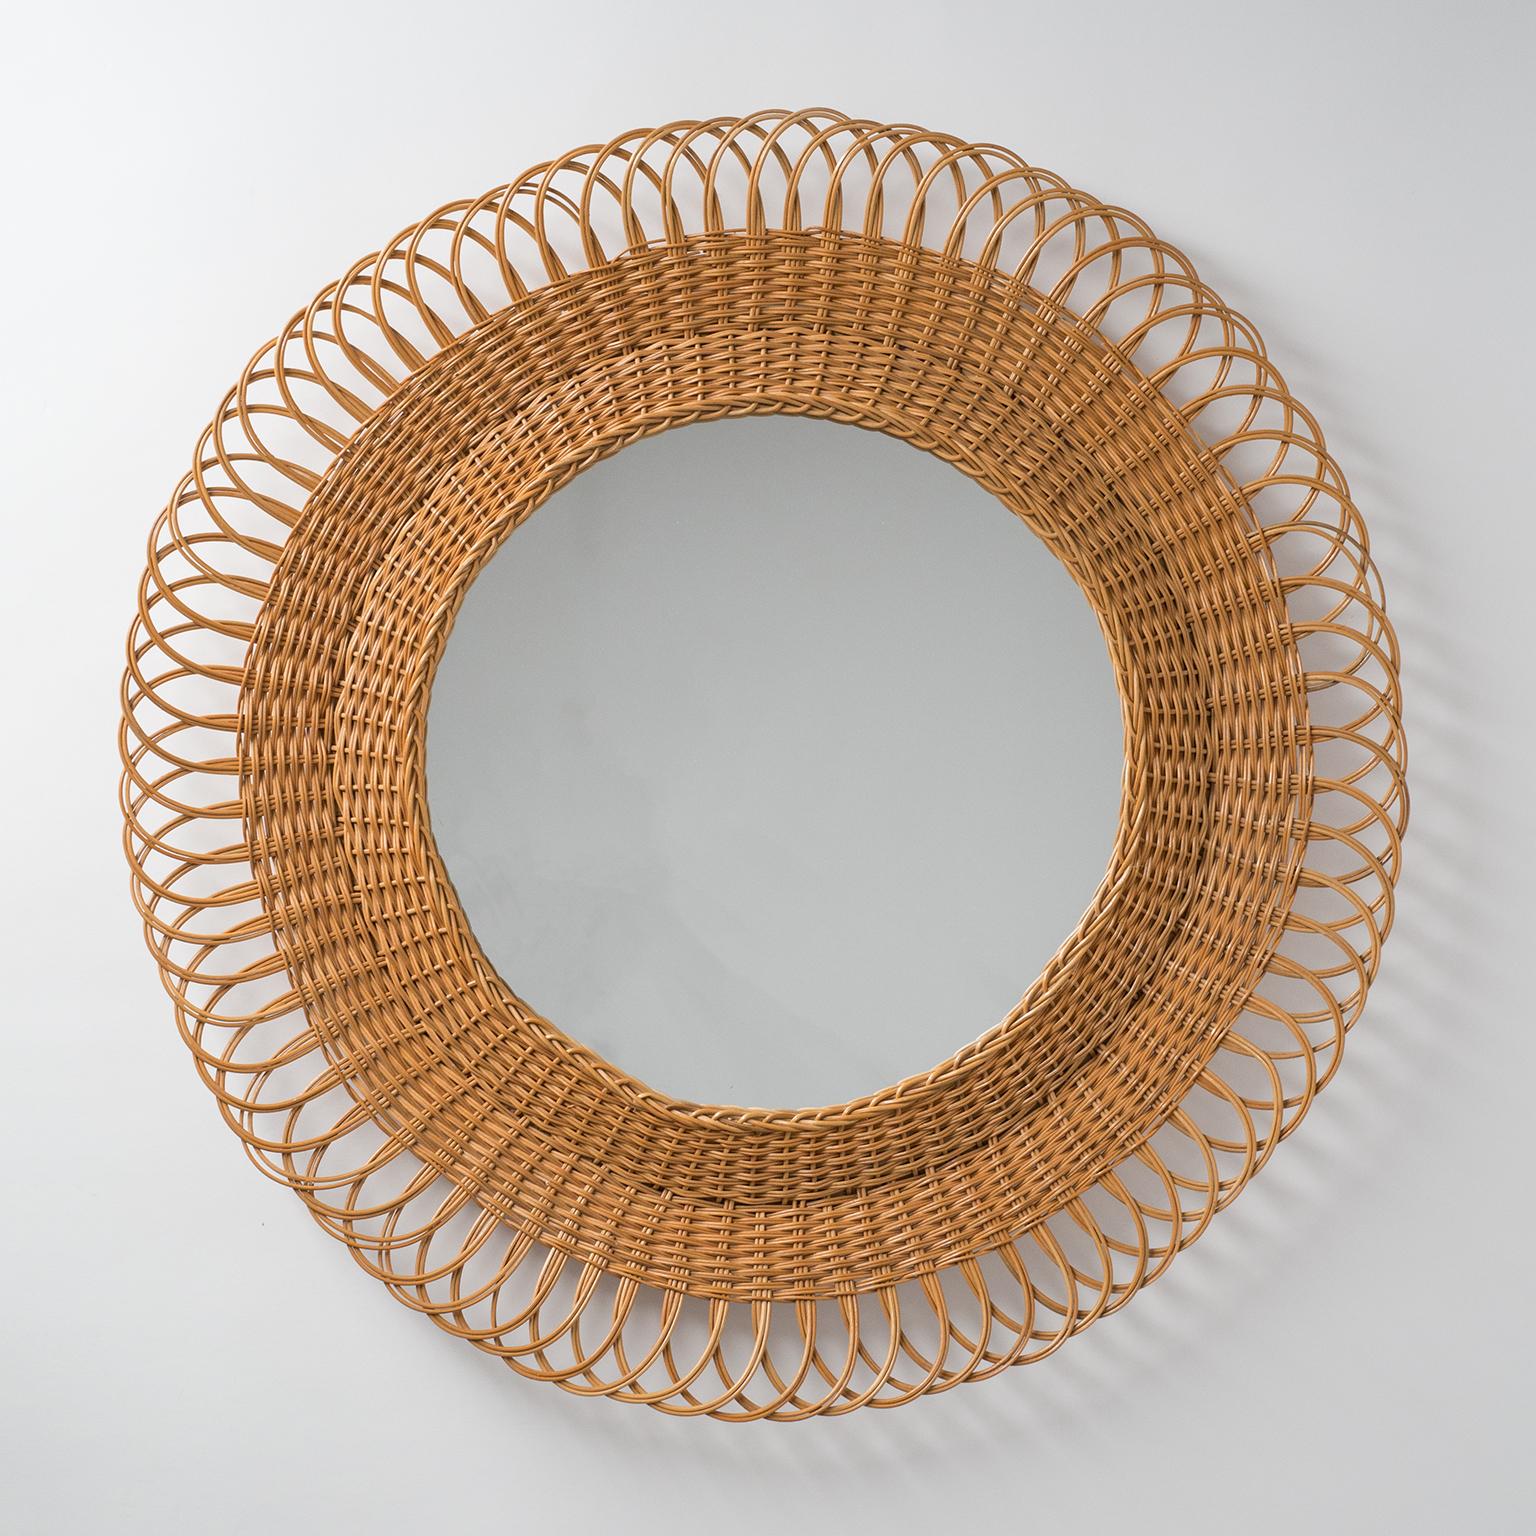 Good-sized French artisanal rattan mirror from the 1960s. Very nice intricate design with an organic feel.
Visible mirror area is 14.5inches/37cm.